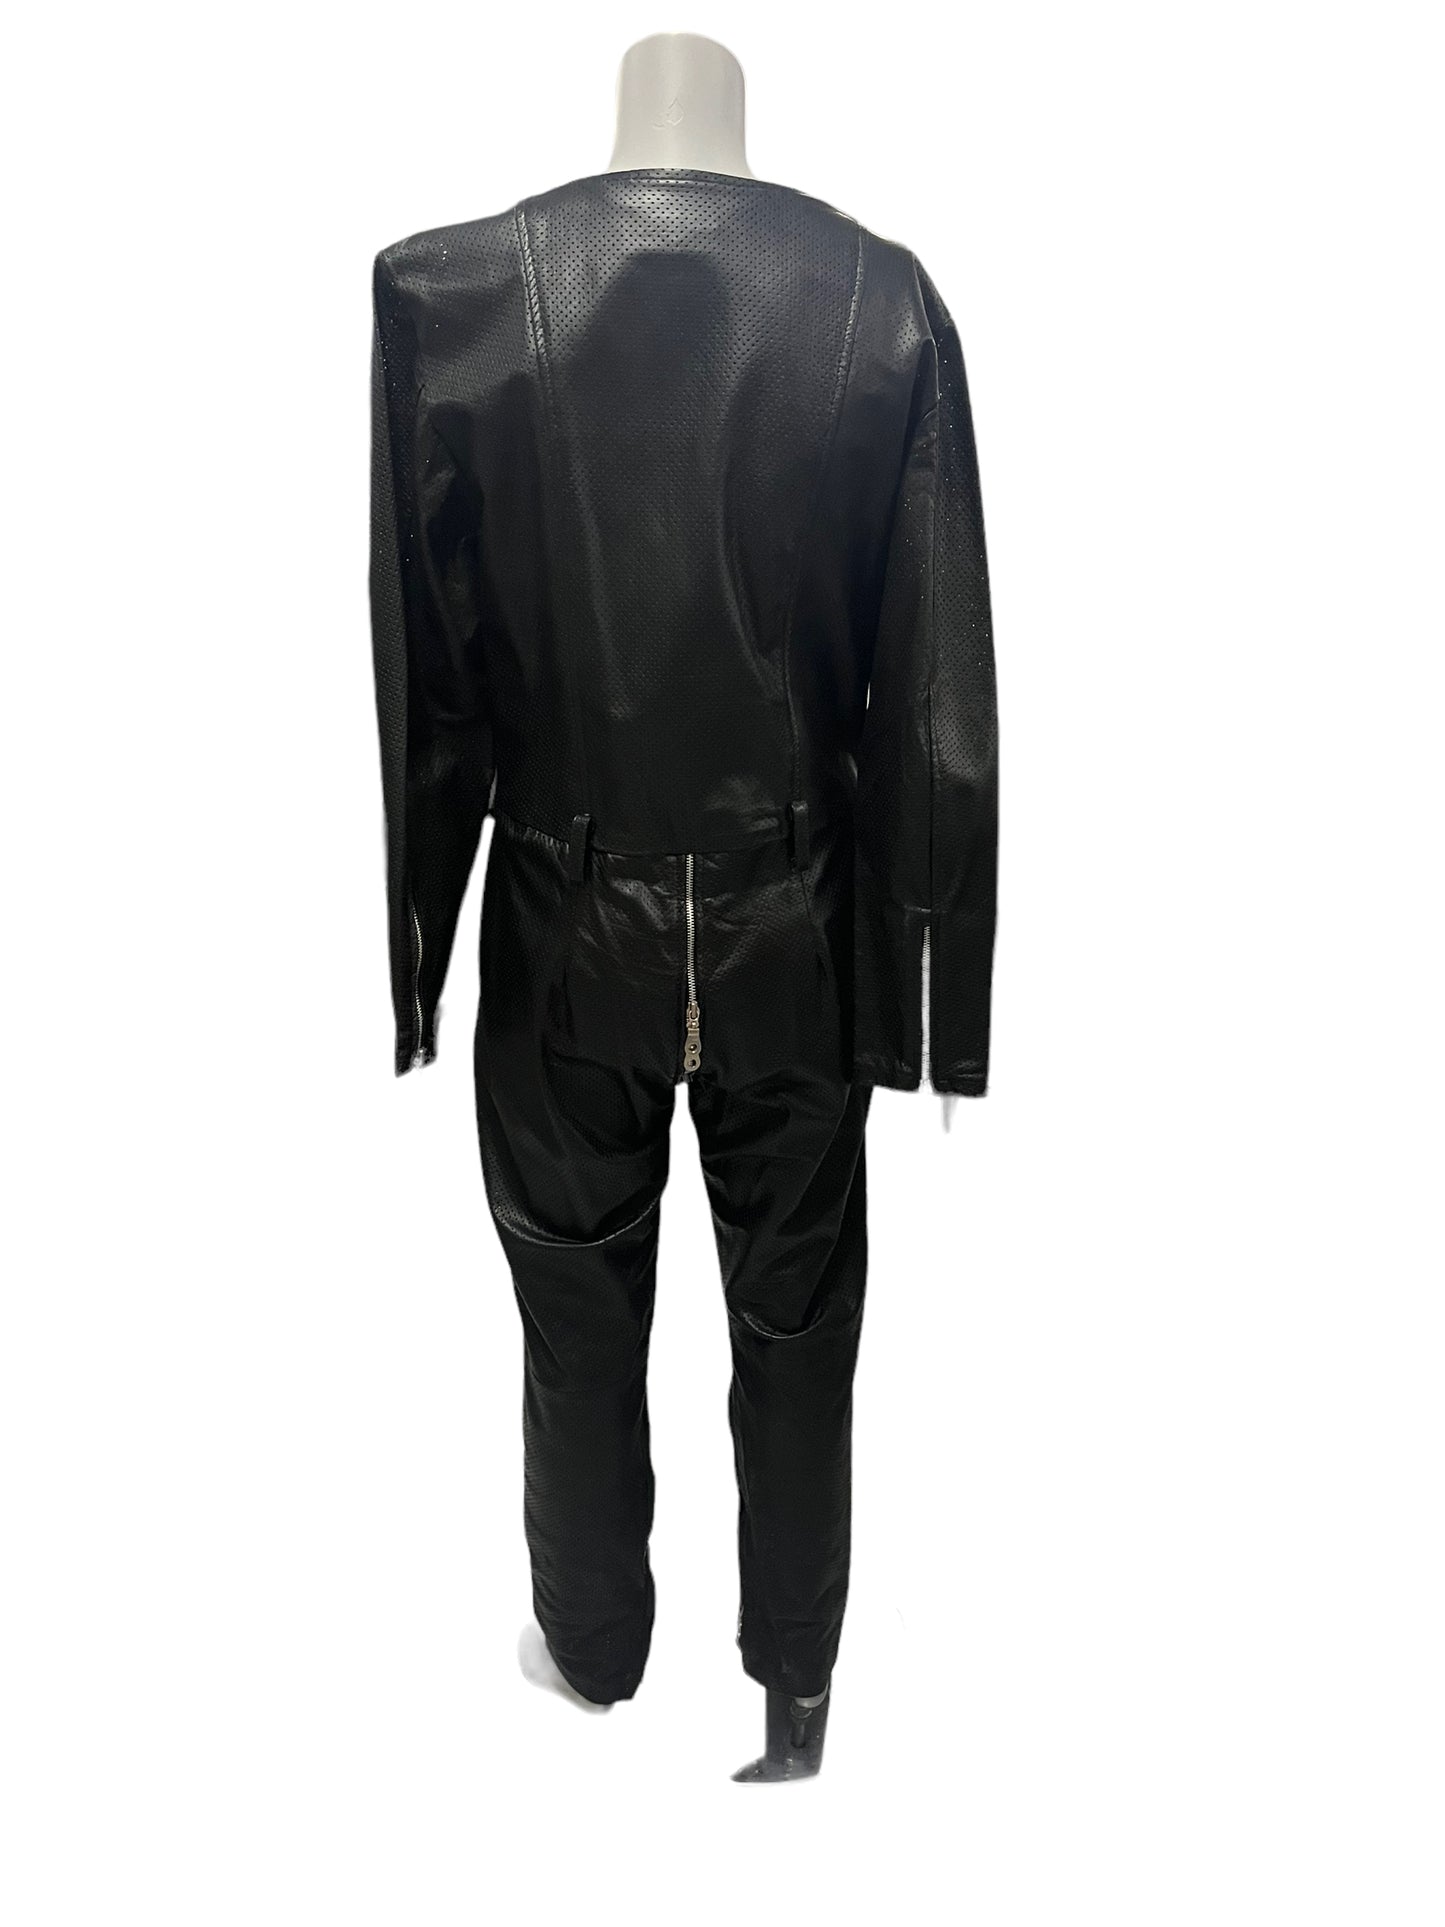 Fashion World - LL92 - Provocative Leather Suit With Shapes - Size XL